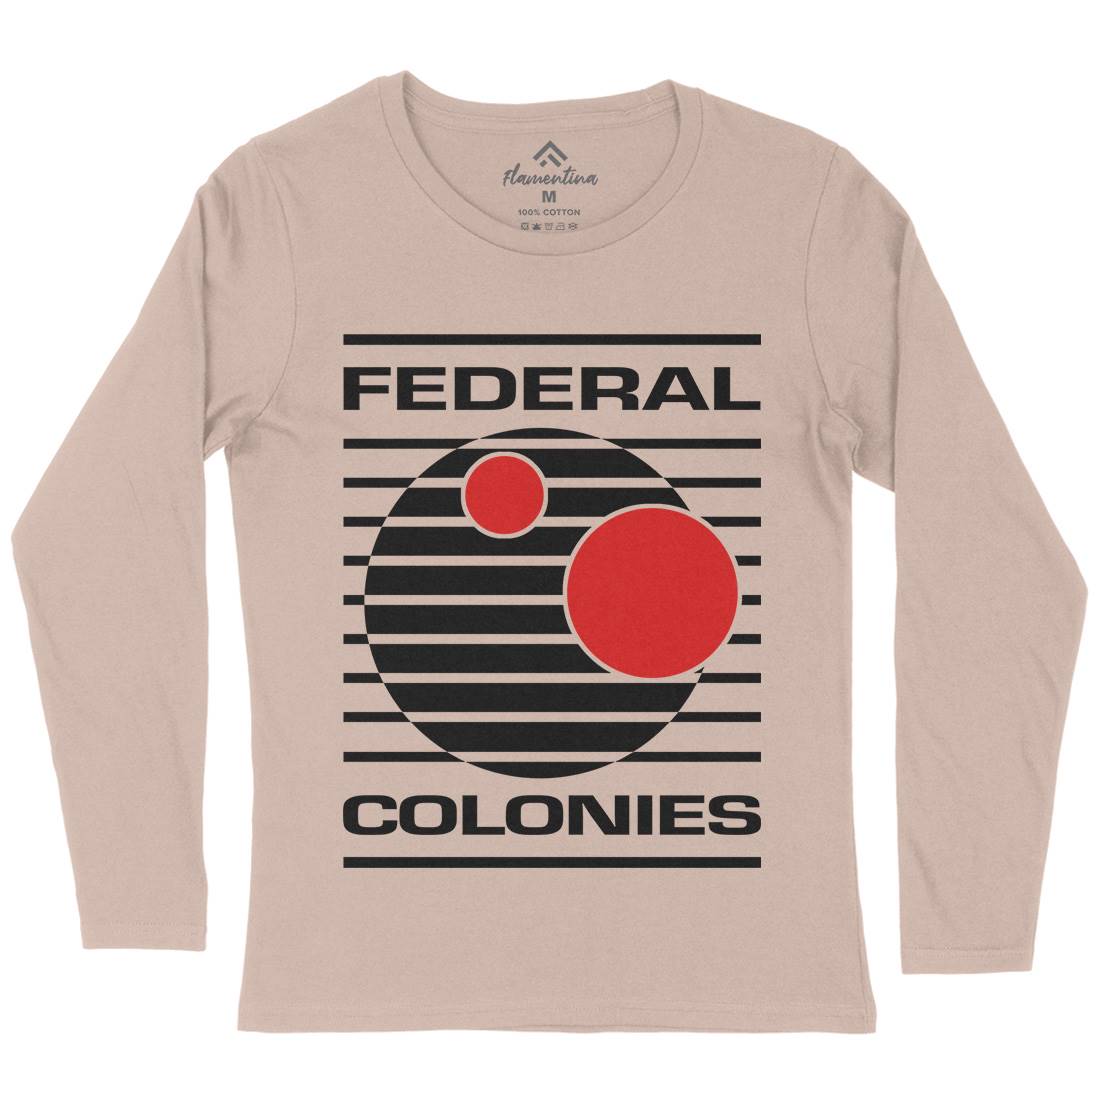 Federal Colonies Womens Long Sleeve T-Shirt Space D409